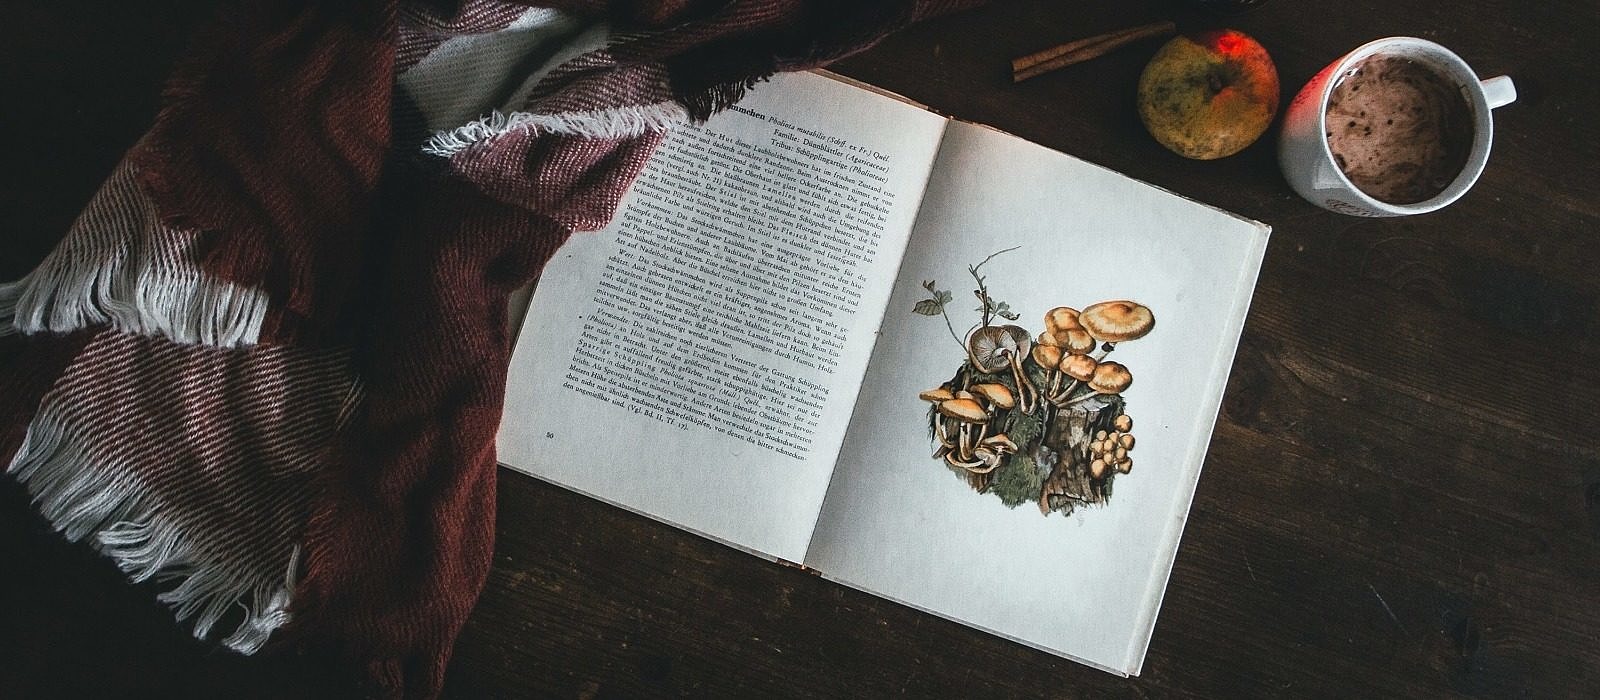 An open book with illustrations of mushrooms on the righthand page and text on the left. (photo ©Kira auf der Heide via Unsplash)